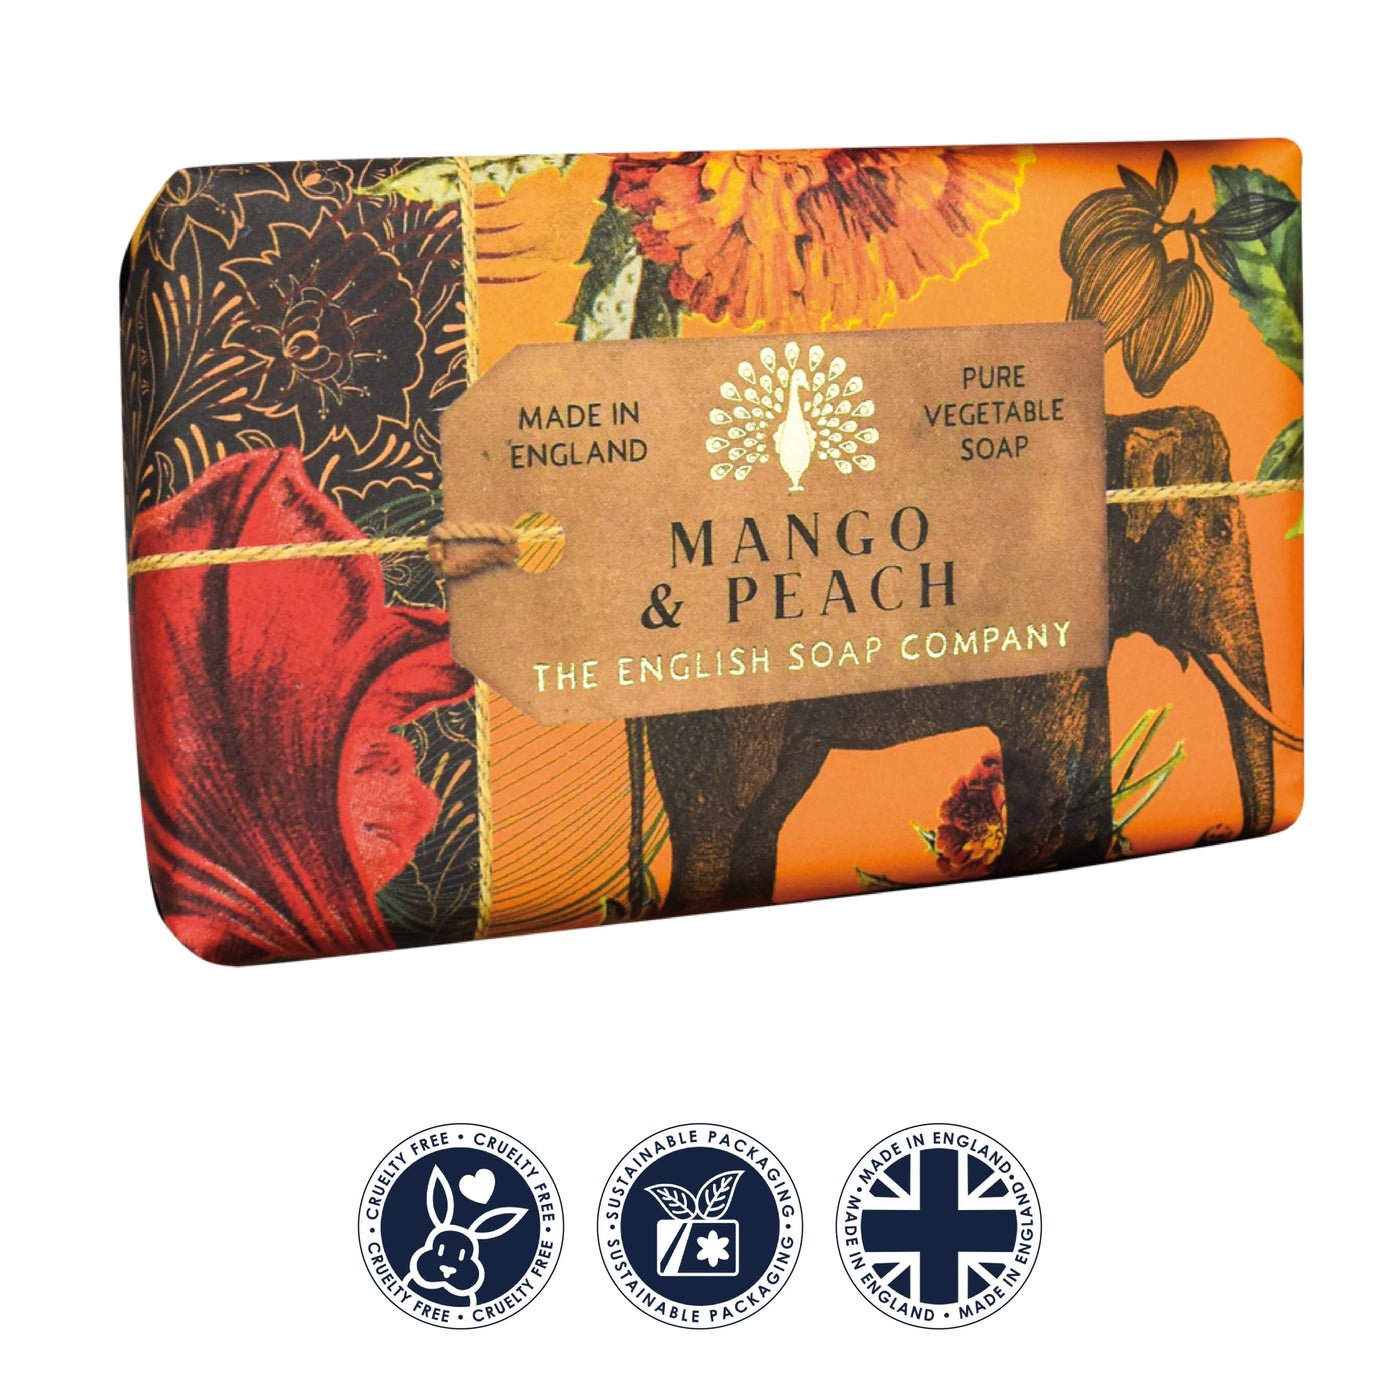 Anniversary Mango & Peach Soap Bar from our Luxury Bar Soap collection by The English Soap Company